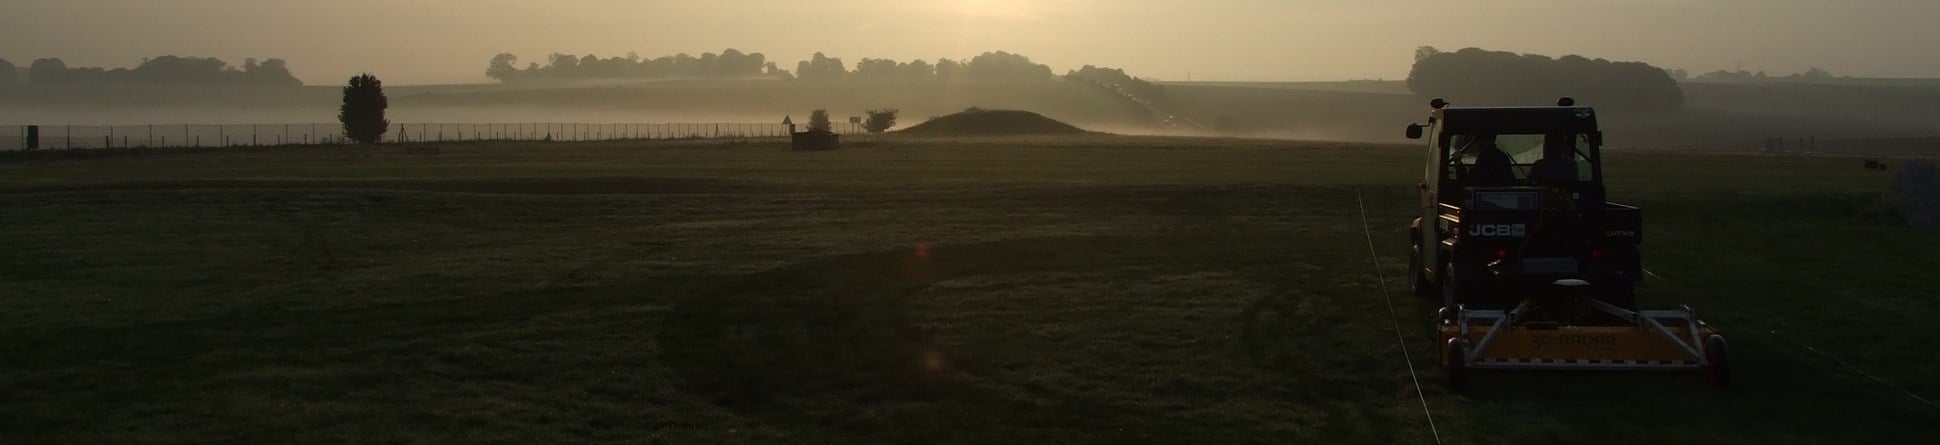 Colour photograph showing a misty landscape with a small buggy towing a low yellow "truck" near the right hand edge